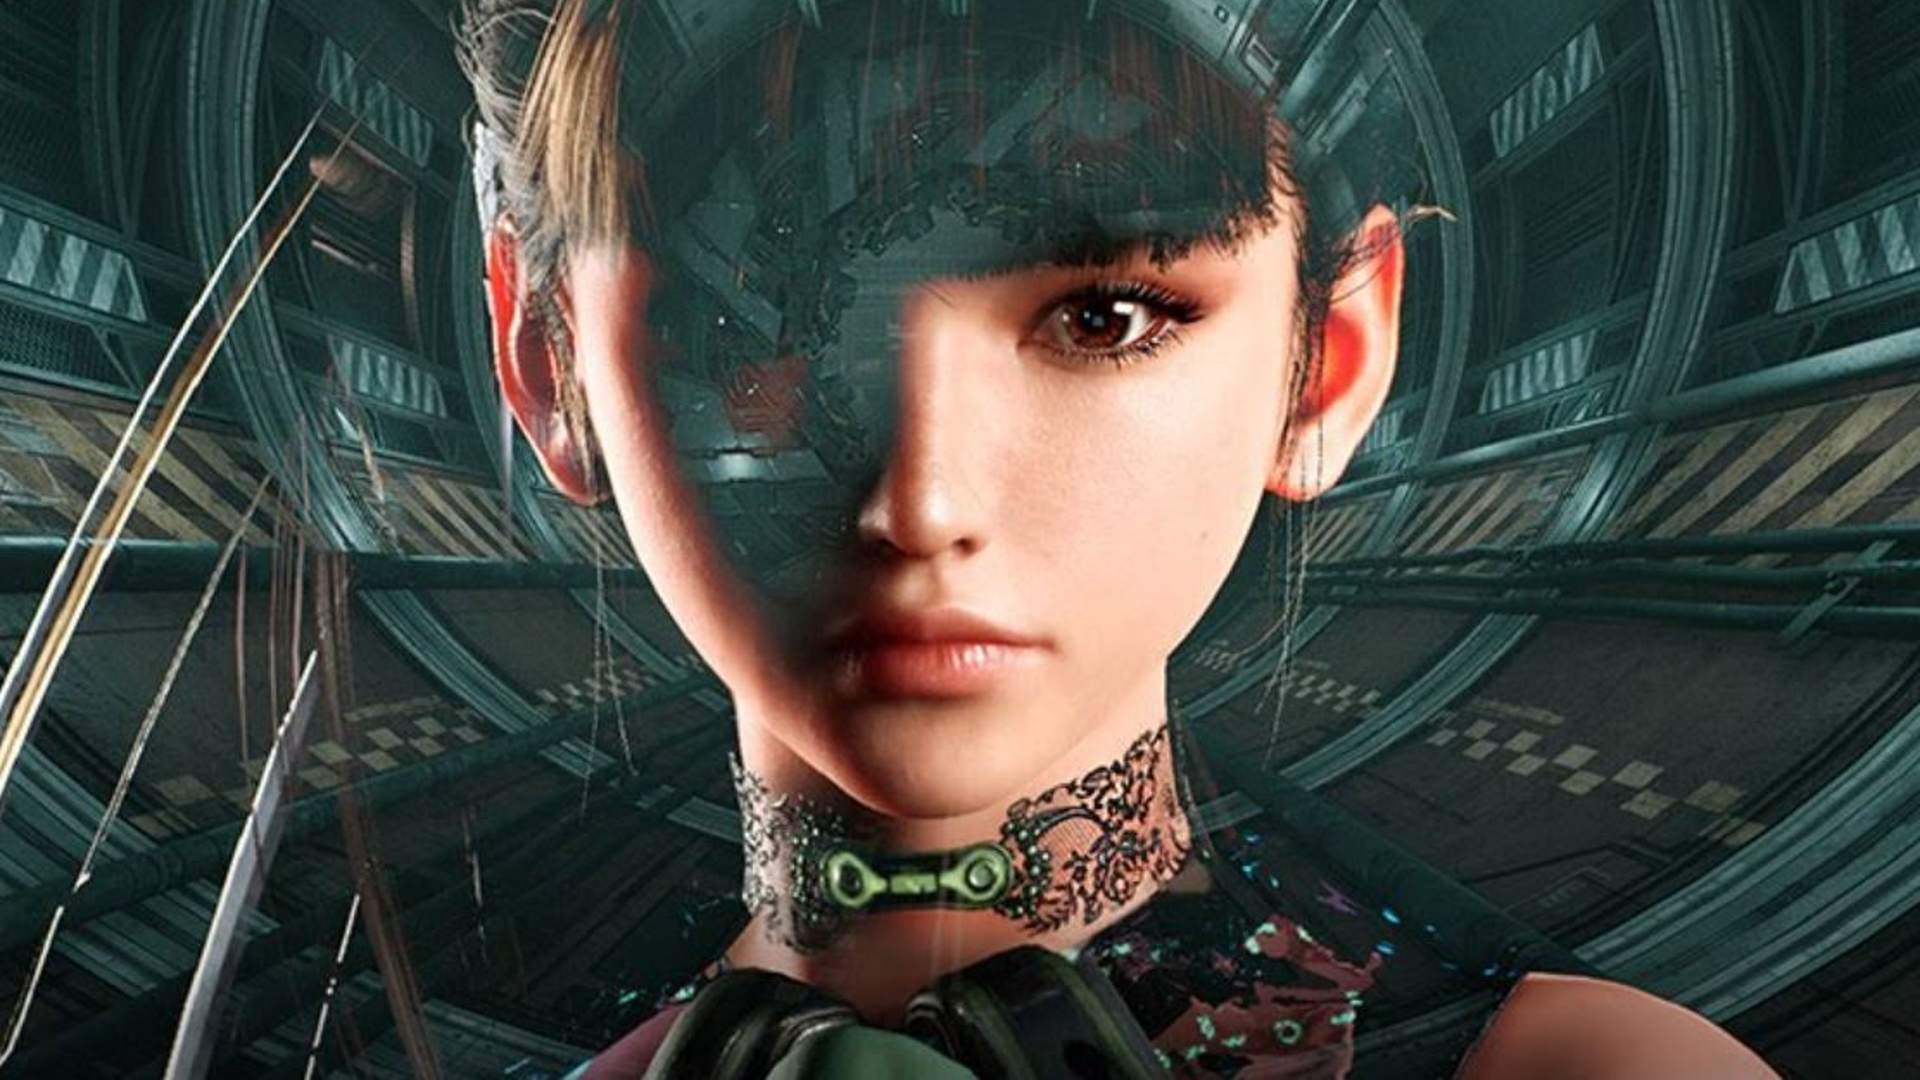 Eve can be seen in Project EVE's key art.